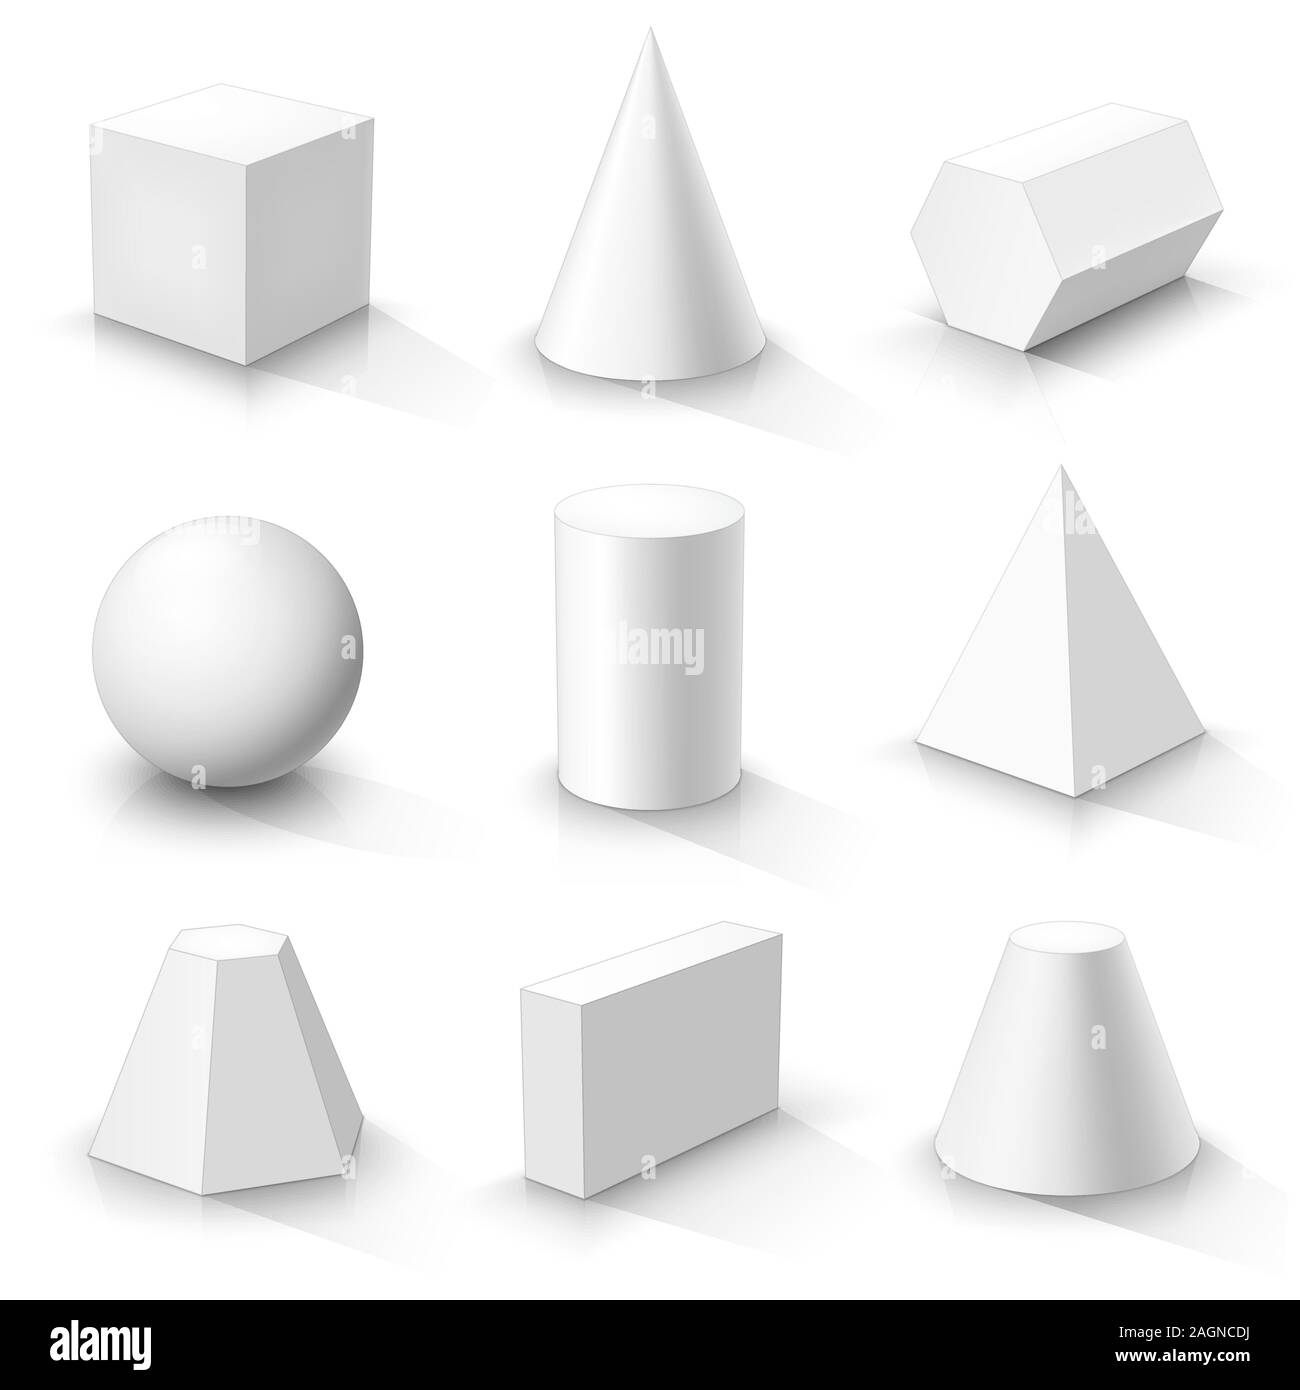 Set of basic 3d shapes. White geometric solids on a white background. Vector illustration Stock Vector